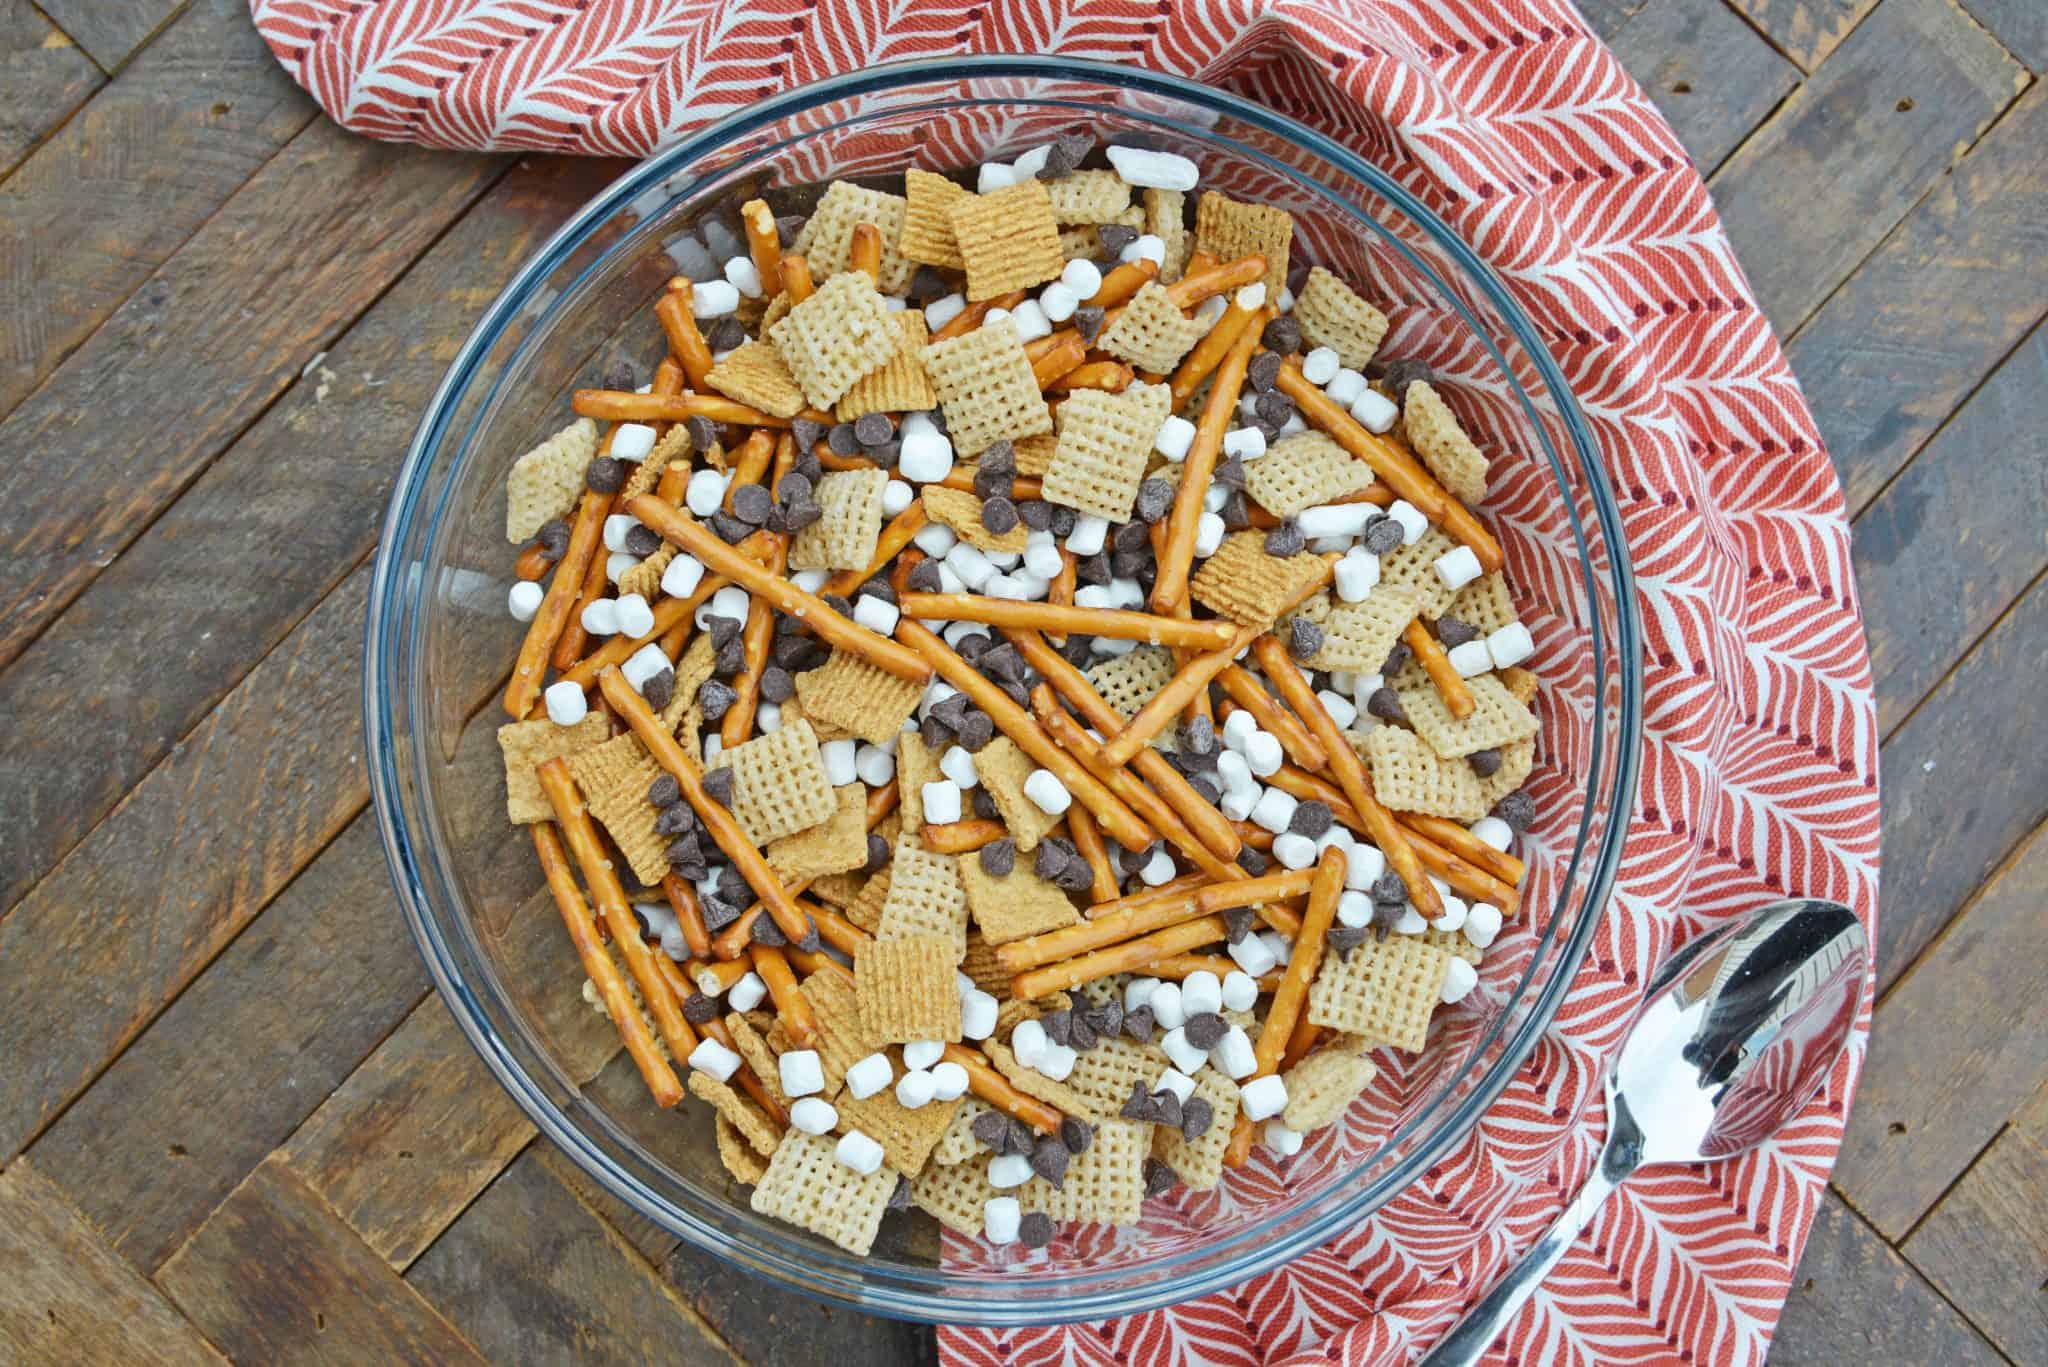 S'mores Trail Mix uses just 5 ingredient to make a sweet, salty and crunchy snack that is perfect for on-the-go and anytime of day! #trailmixrecipes #smoresrecipes www.savoryexperiments.com